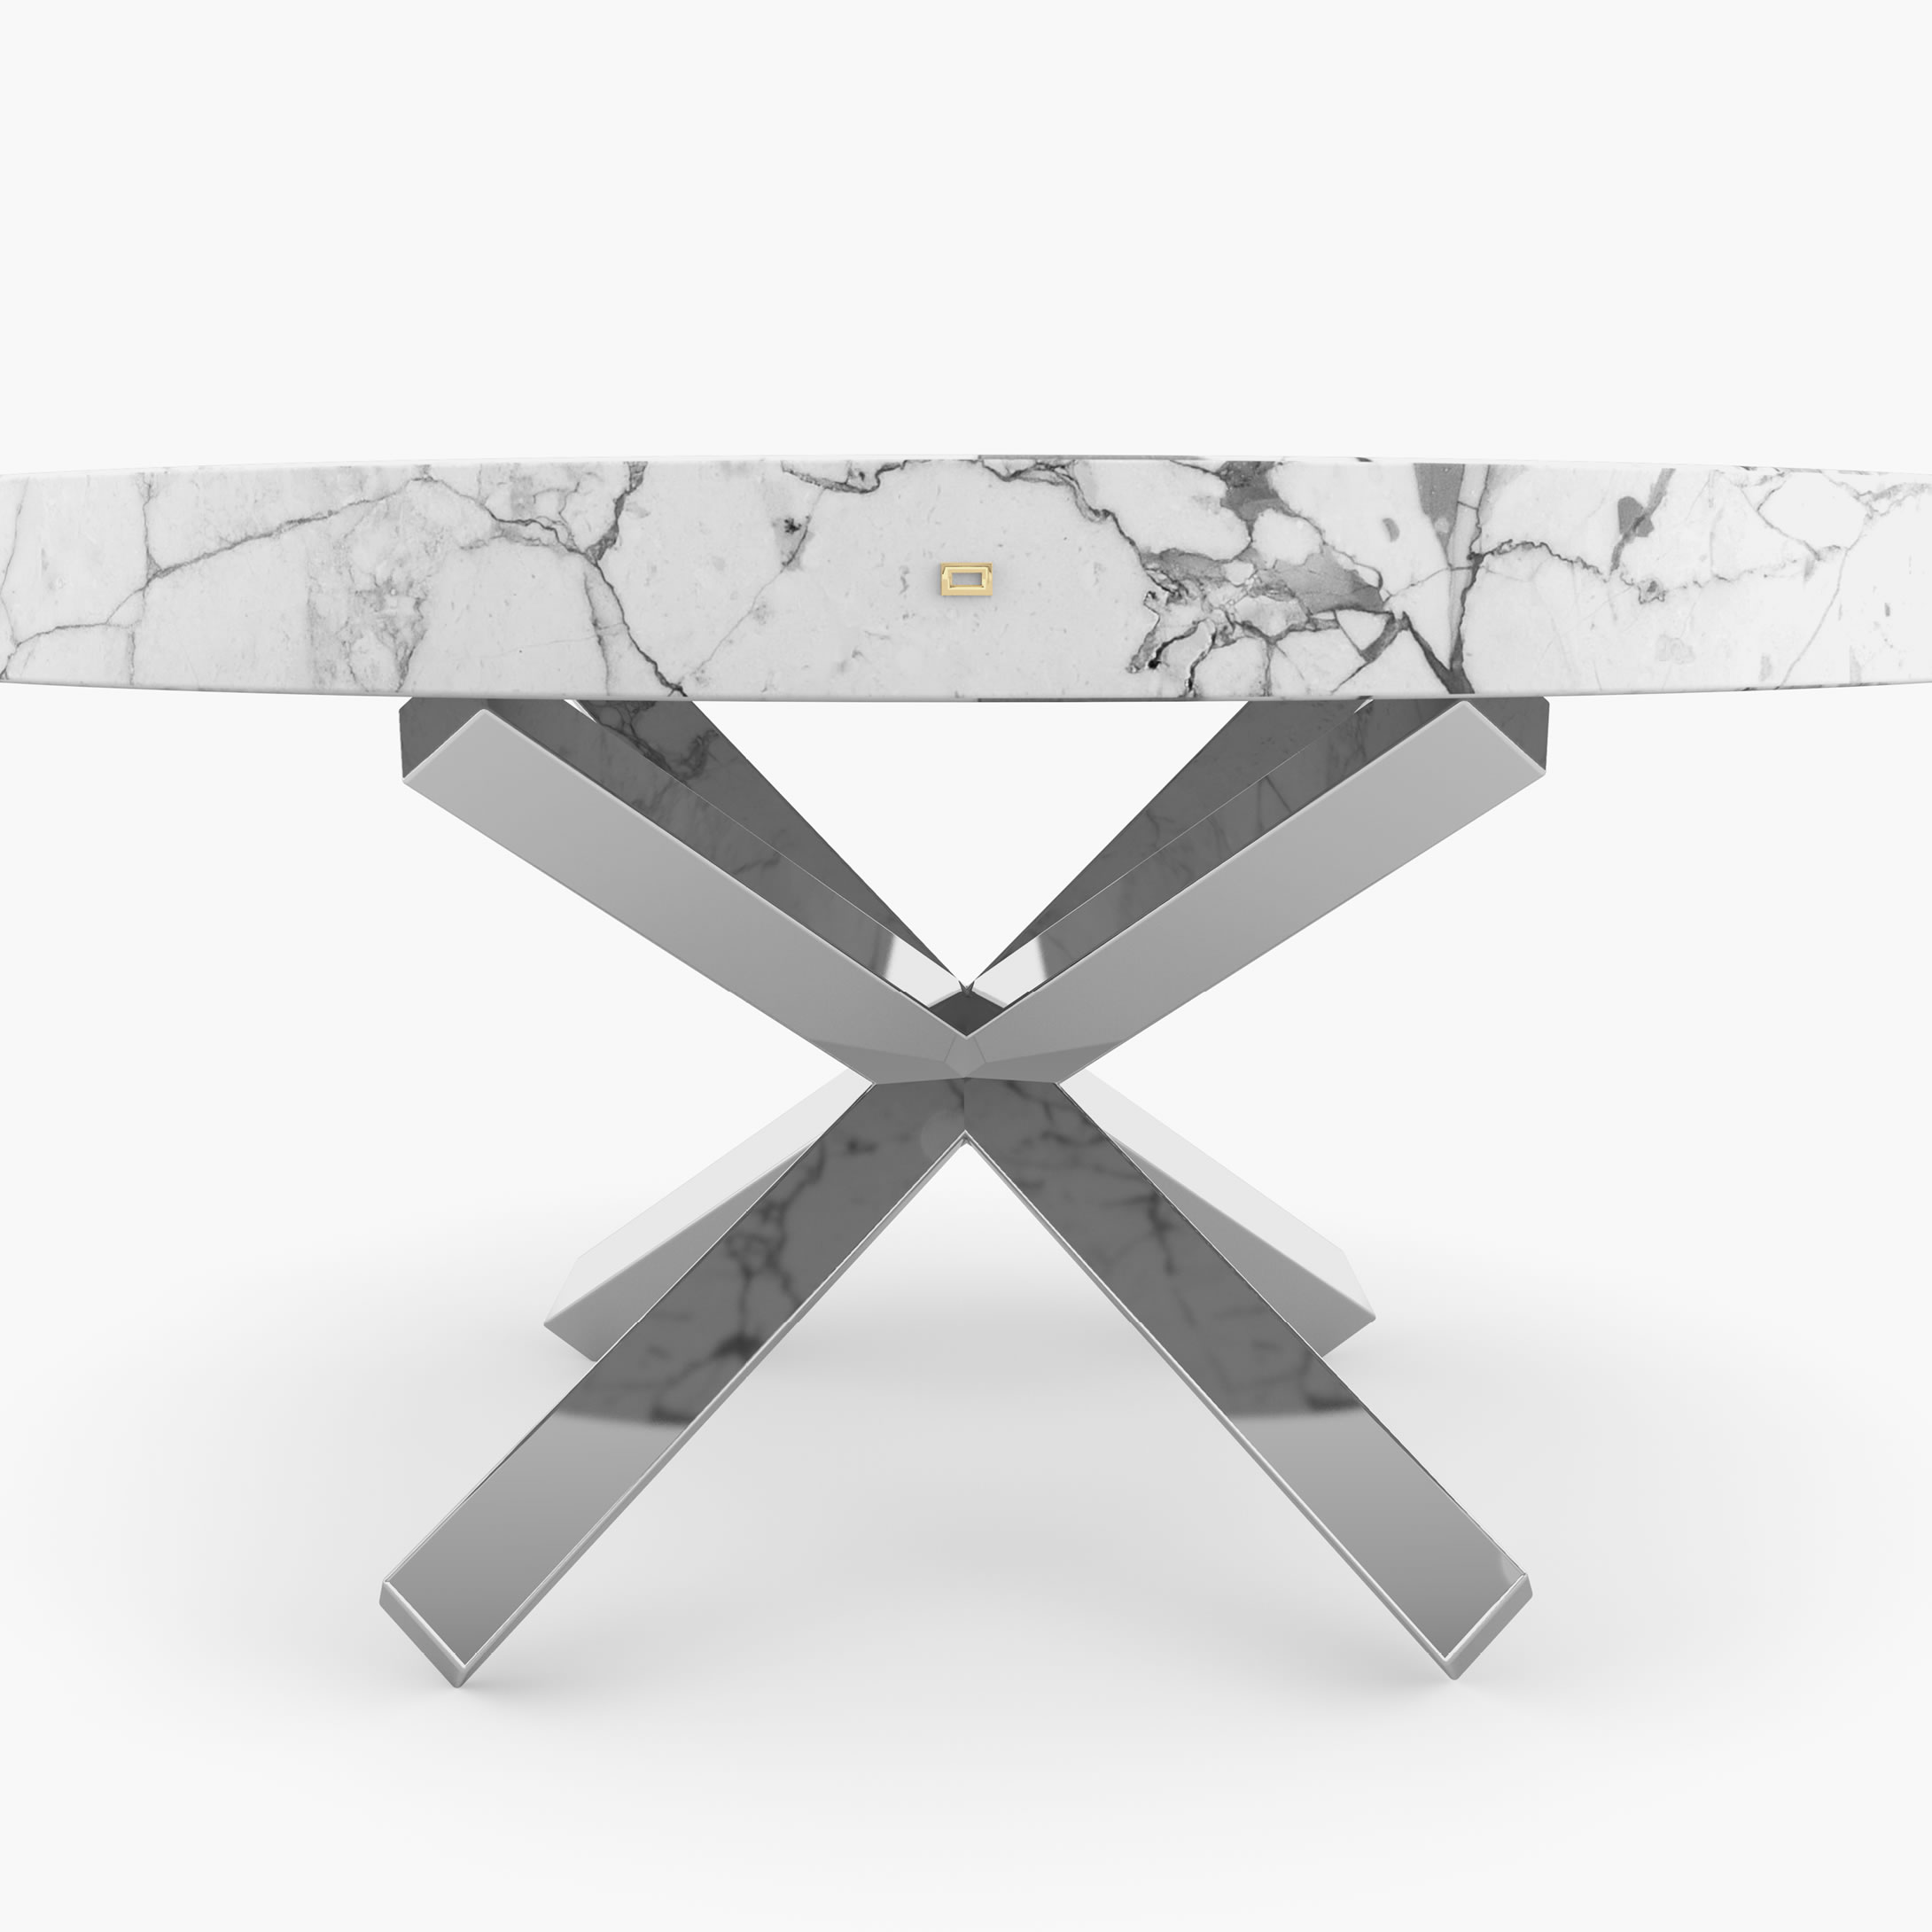 Dining Table round crossed X legs White Arabescato Marble iconic Dining Room modern art Dining Tables FS 194 E FELIX SCHWAKE